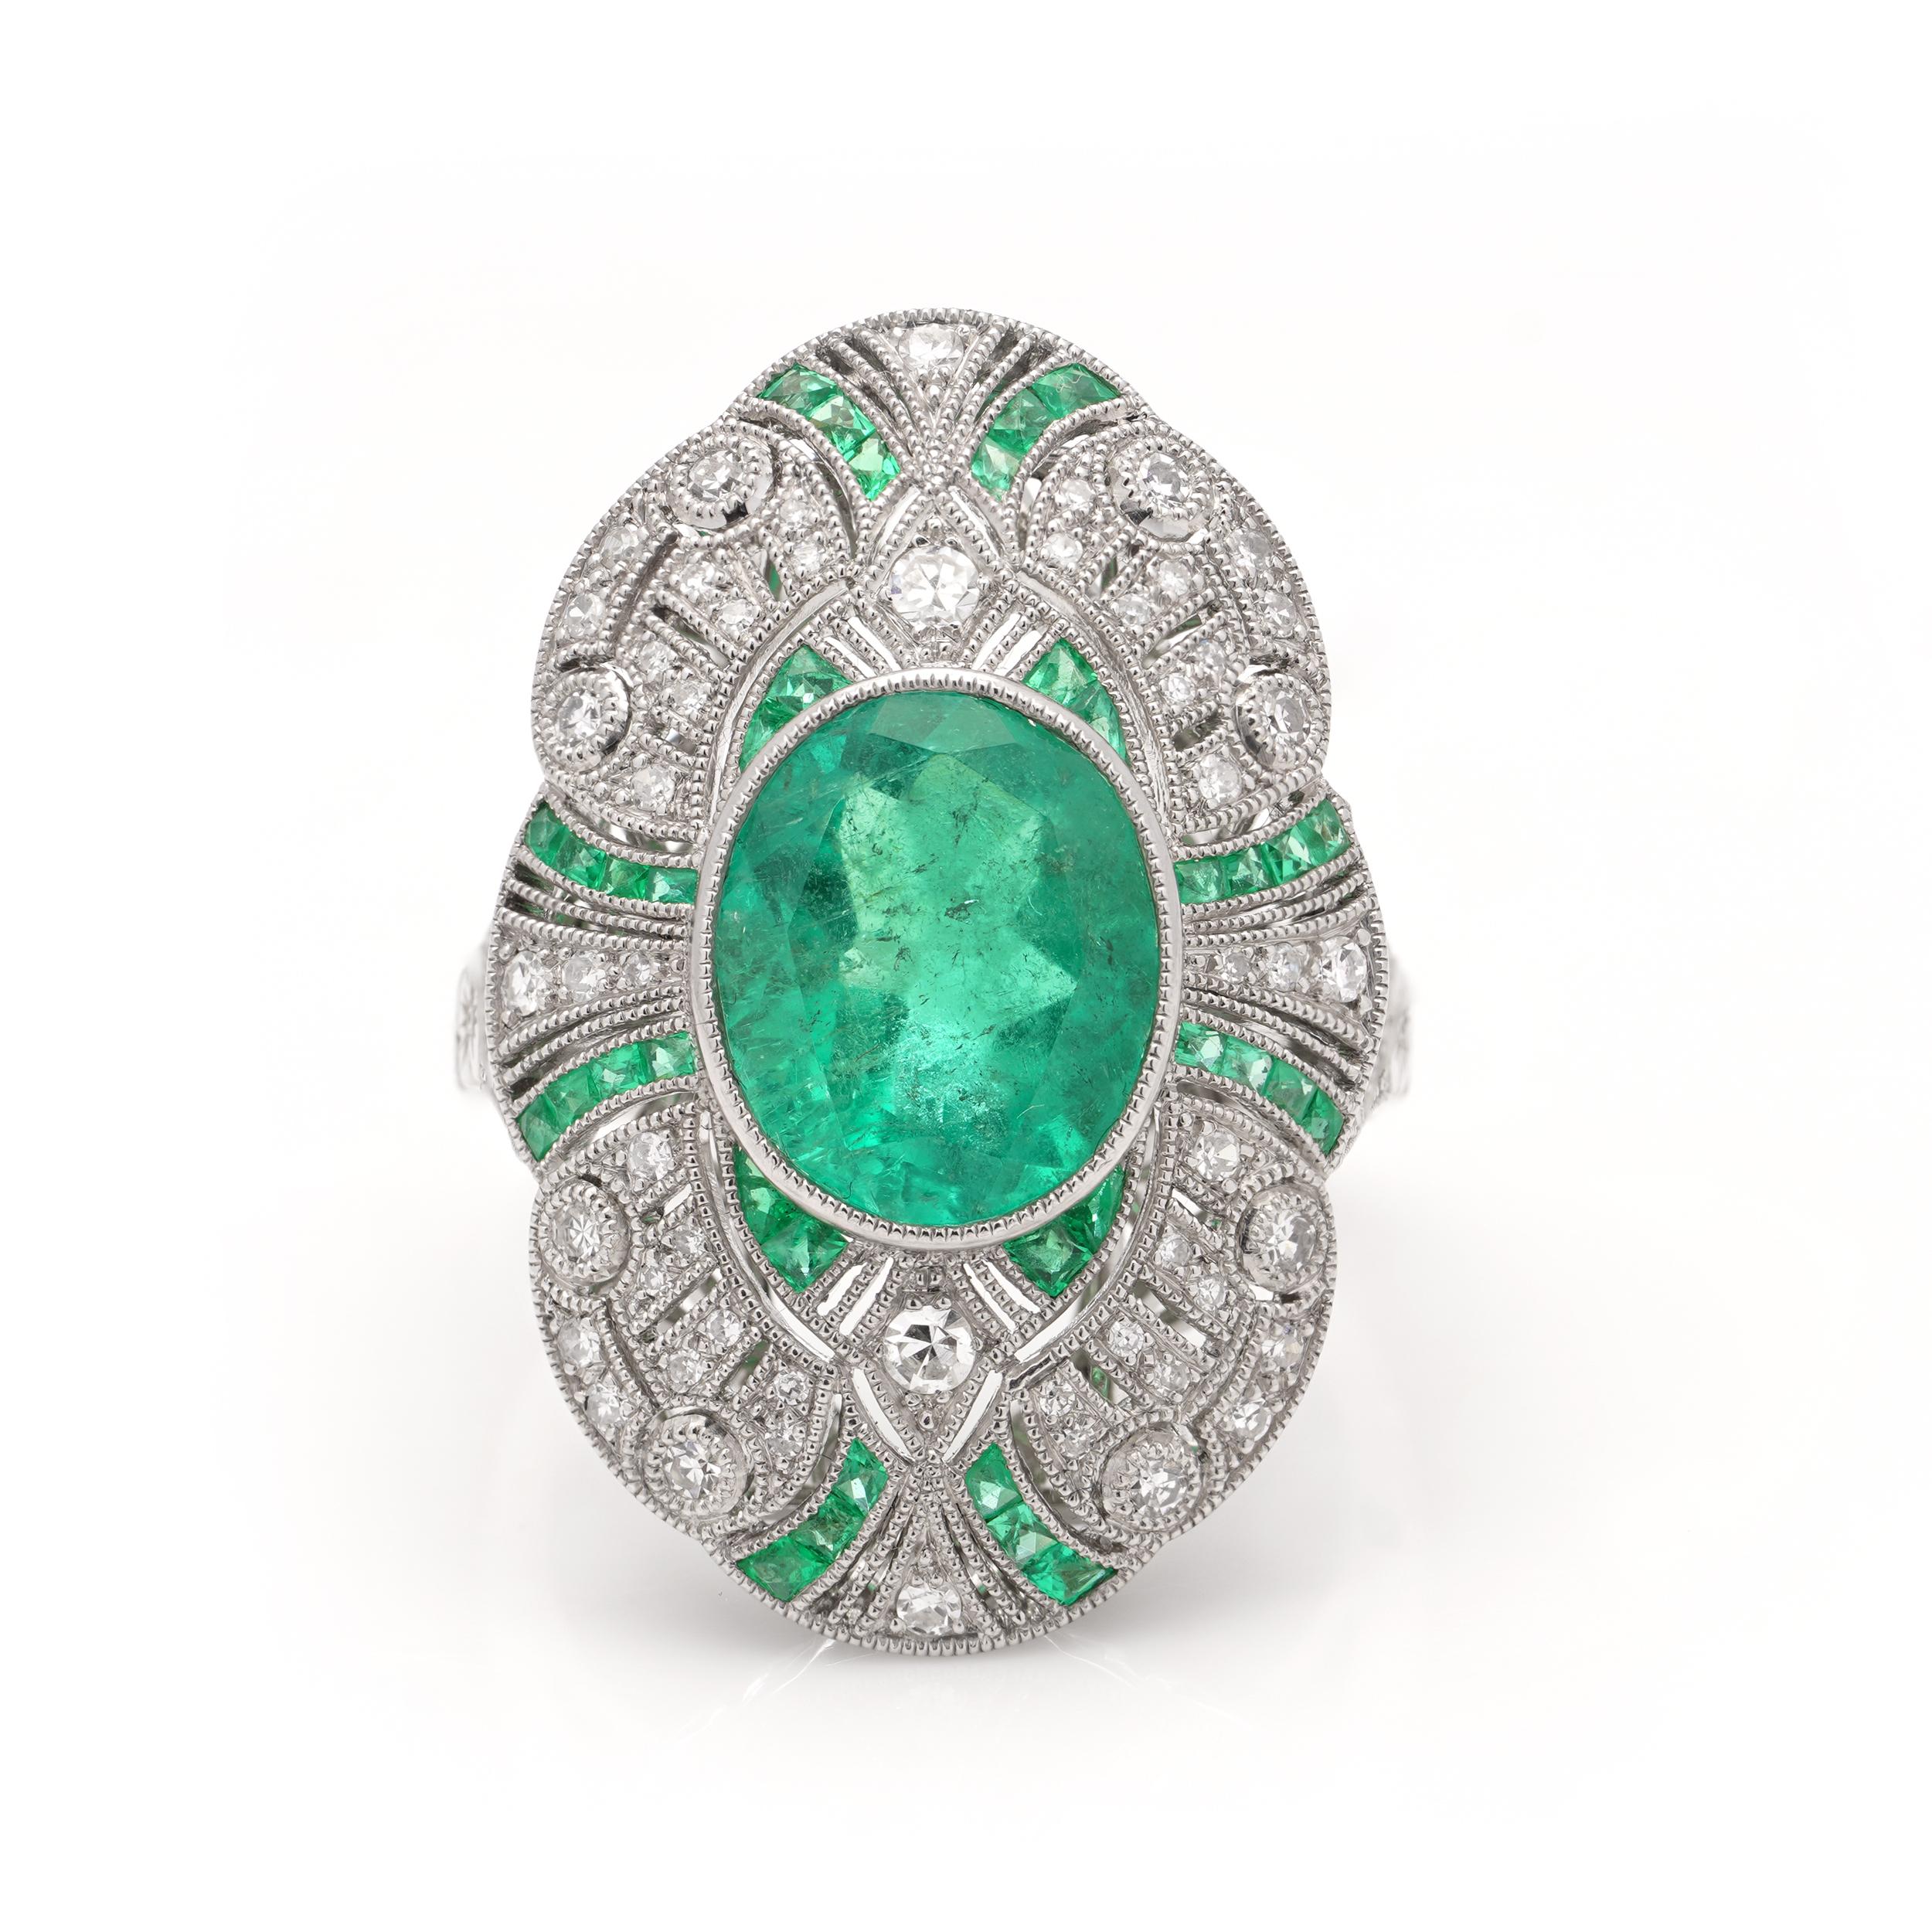 Platinum Art Deco-inspired 3.62  carats of Emerald fashion ring, surrounded by brilliant cut diamonds.

Made in After 2000
The ring tested positive for .850 platinum purity. 

Dimensions - 
Ring Size (UK) = O (EU) = 55.6  (US) = 7.5 
Weight: 12